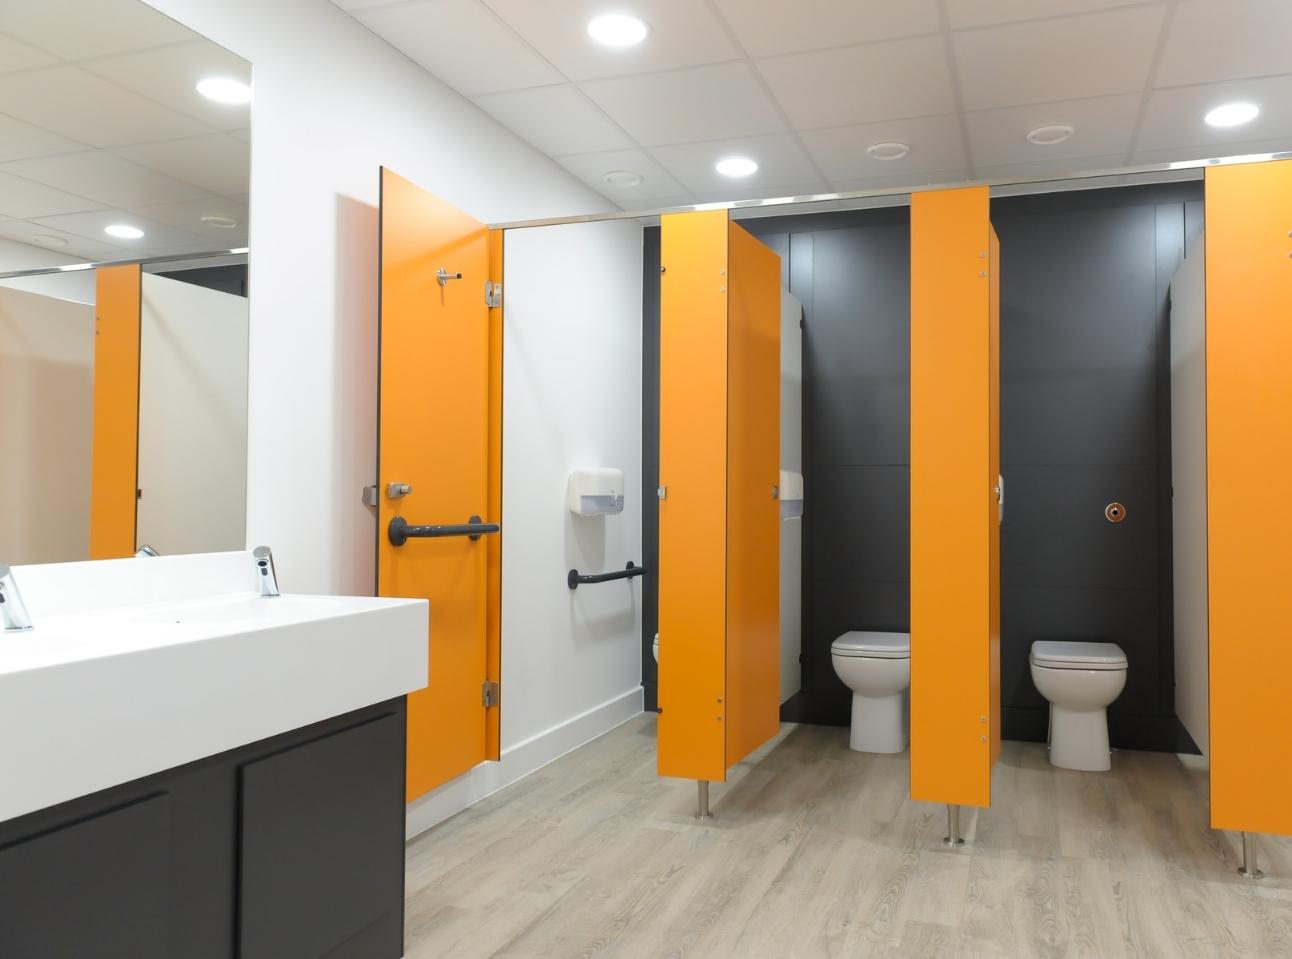 Settle Group Office Toilet Room Refurbishment | Case Study | Commercial Washrooms